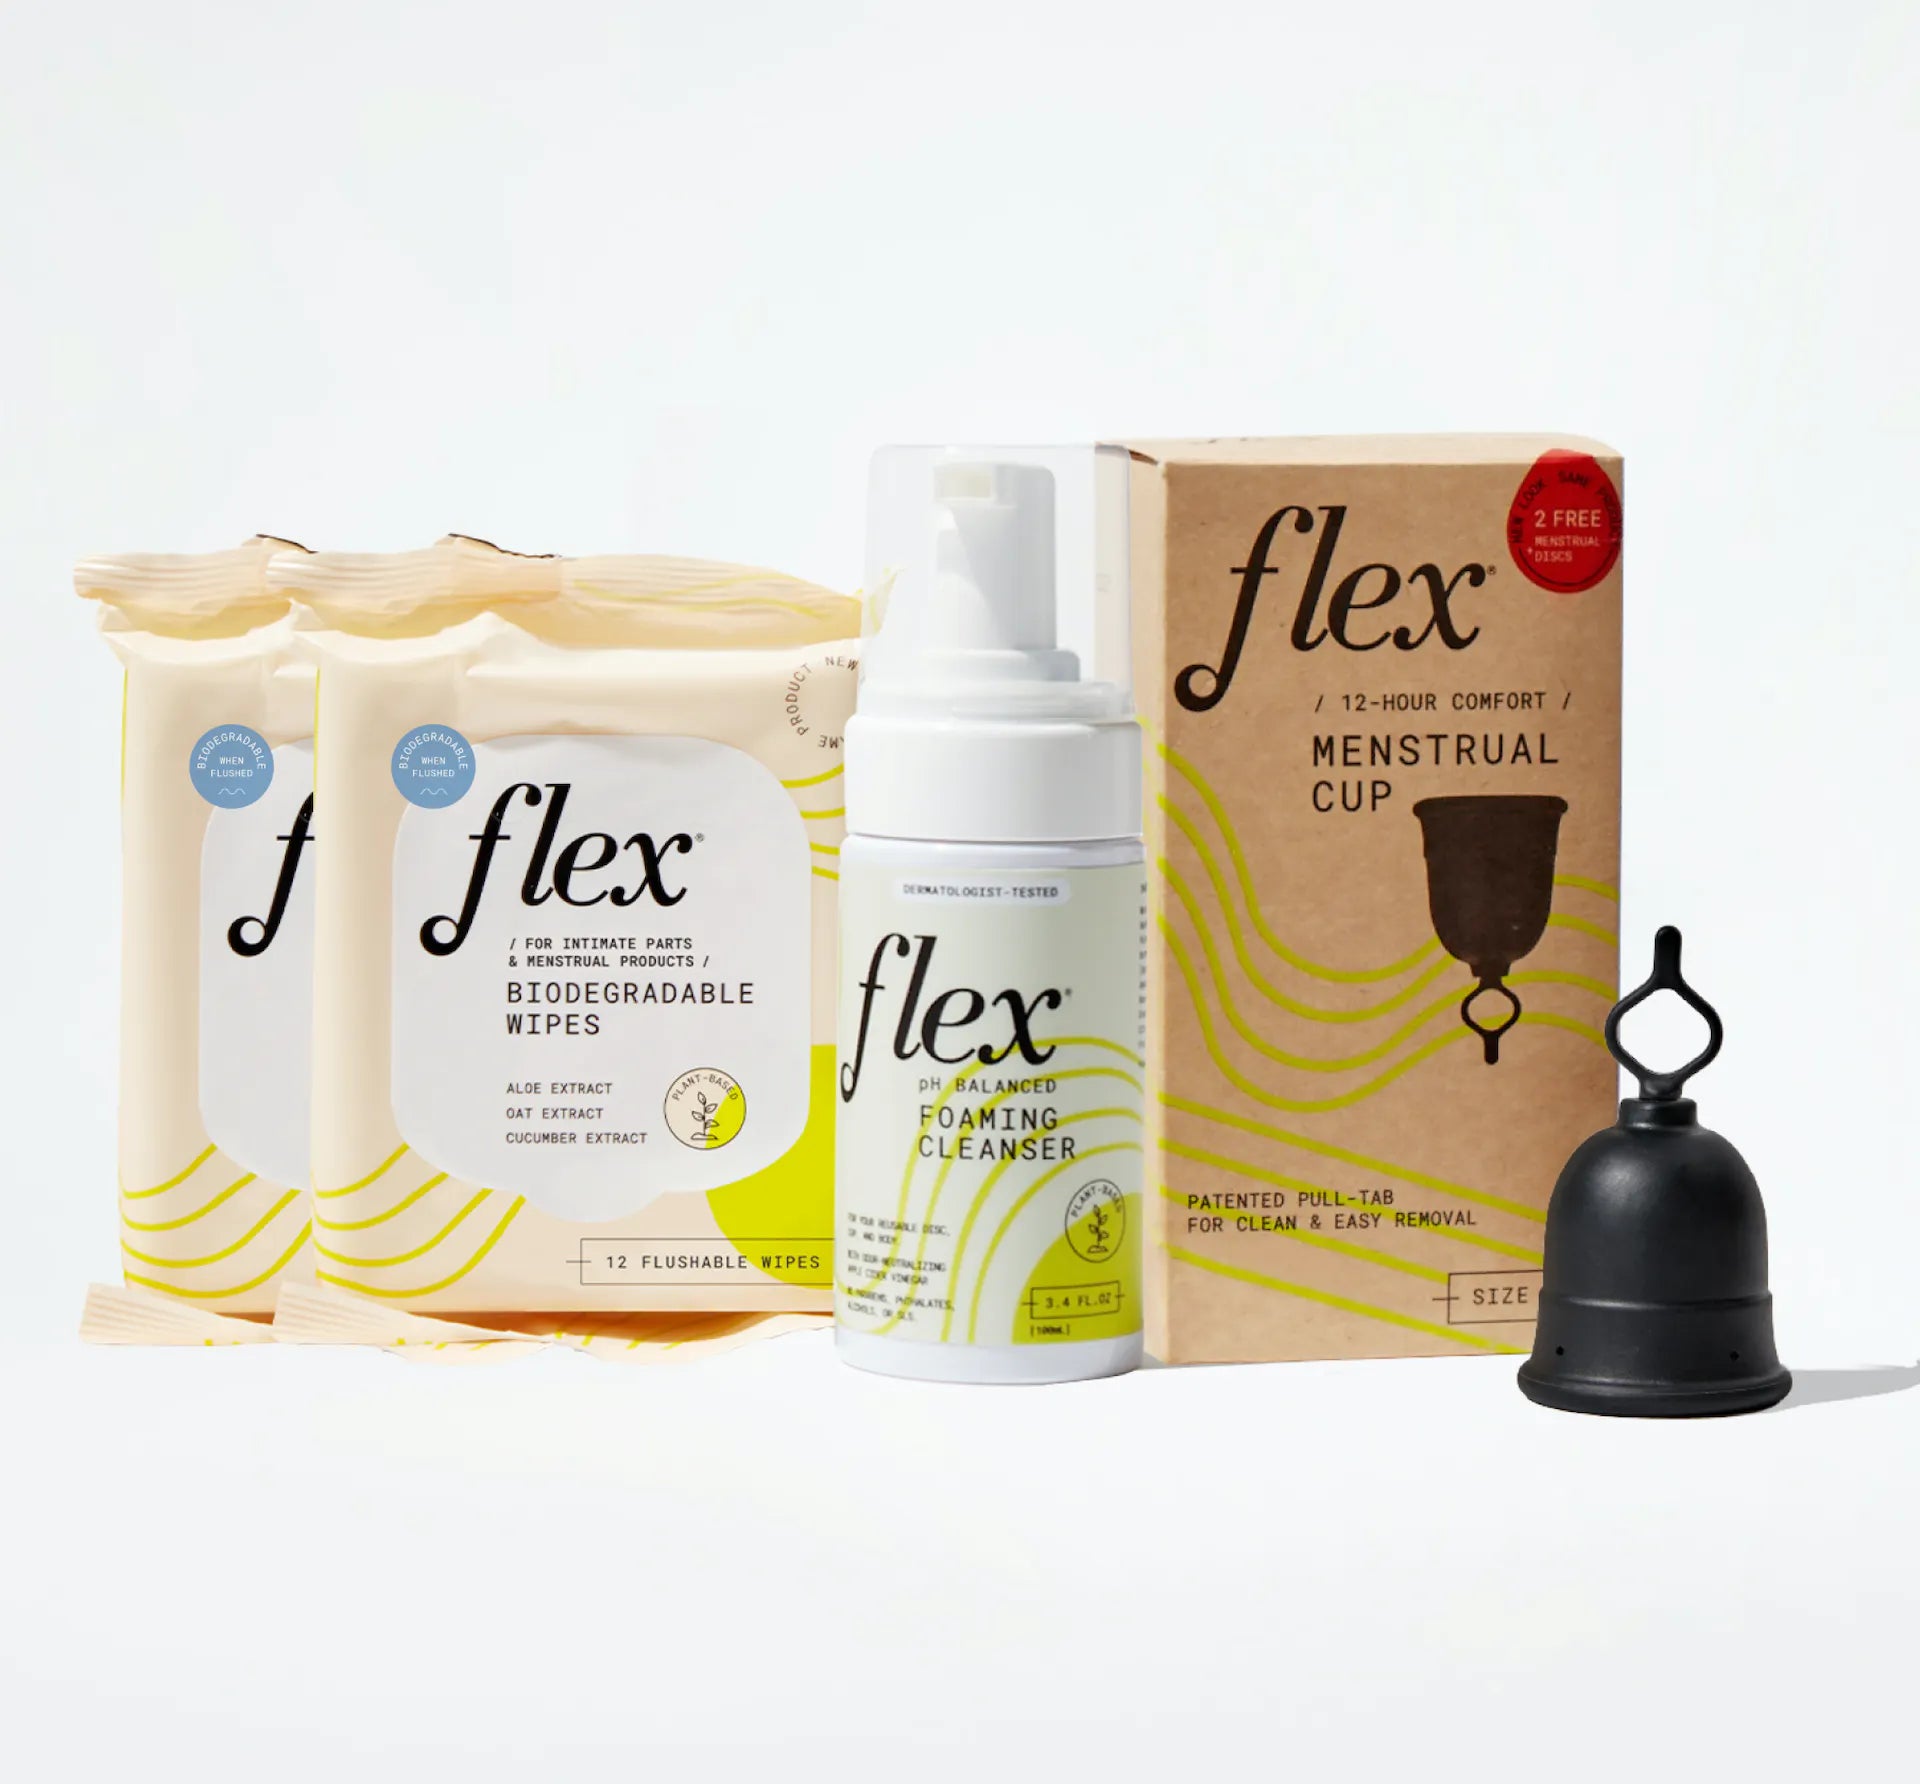 About Flex: Our Mission & Values  Flex® Sustainable Period Products